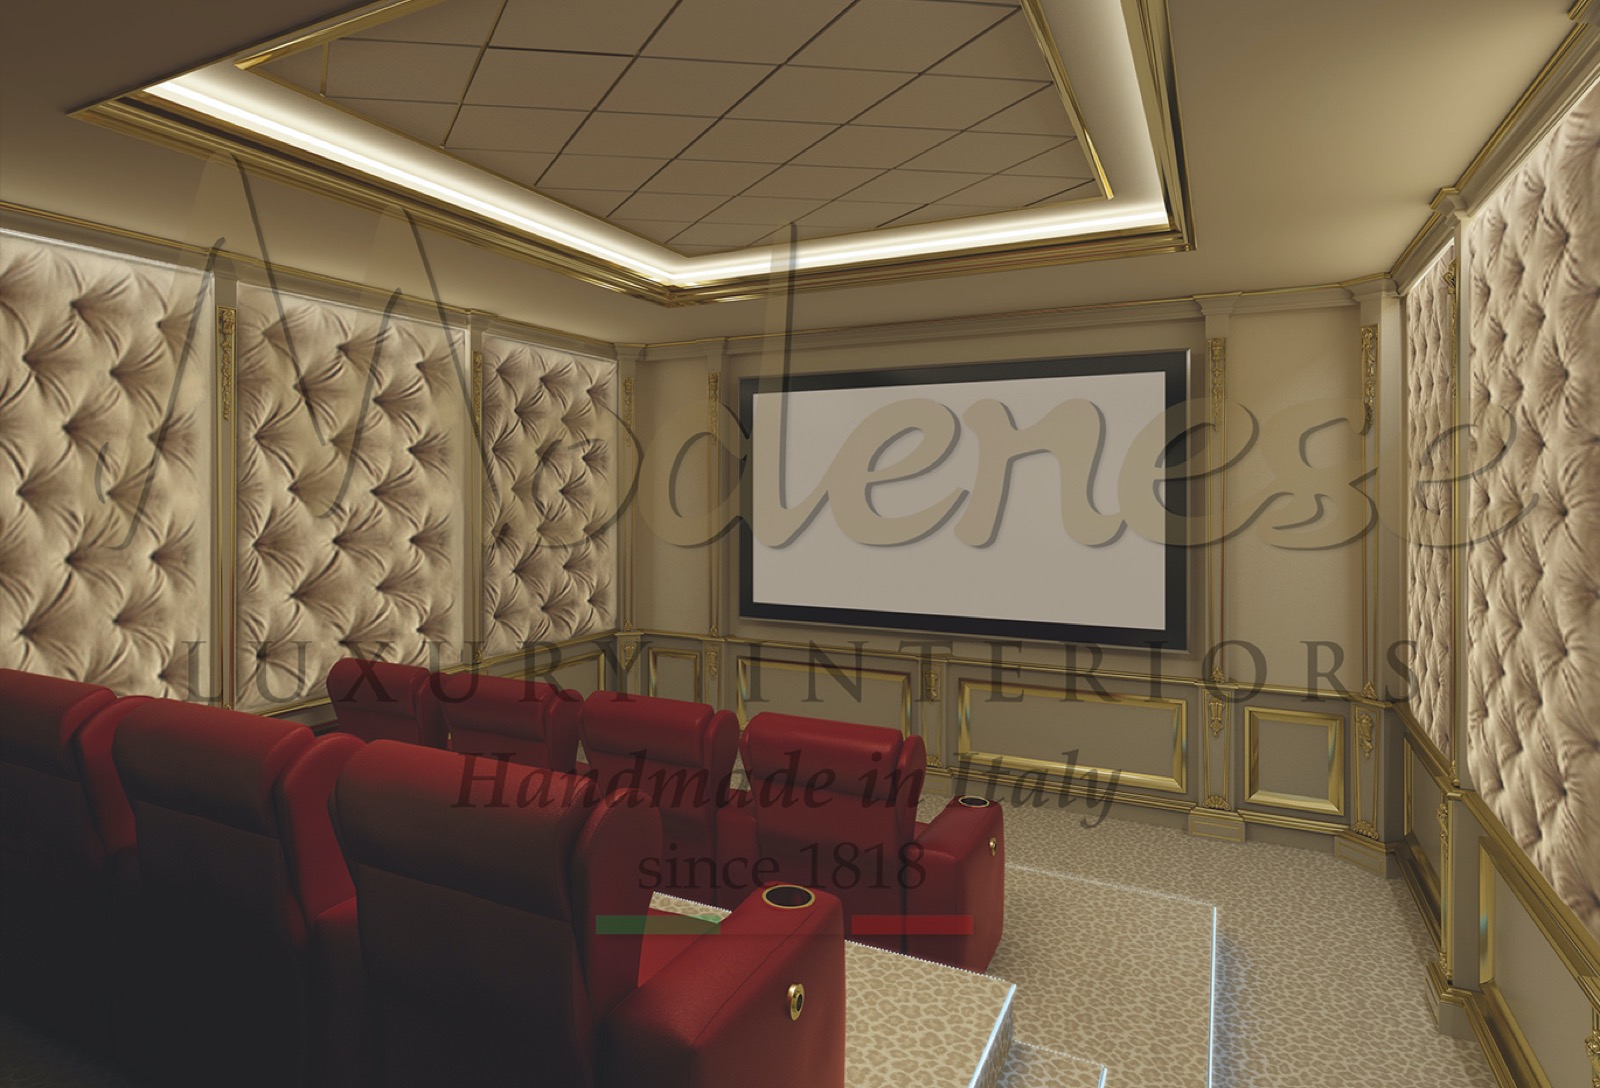 luxury home cinema room villa project entertainment space sofa armchair bespoke furniture turkey interior design solutions 3D HD screen sound system premium quality materials upholstery